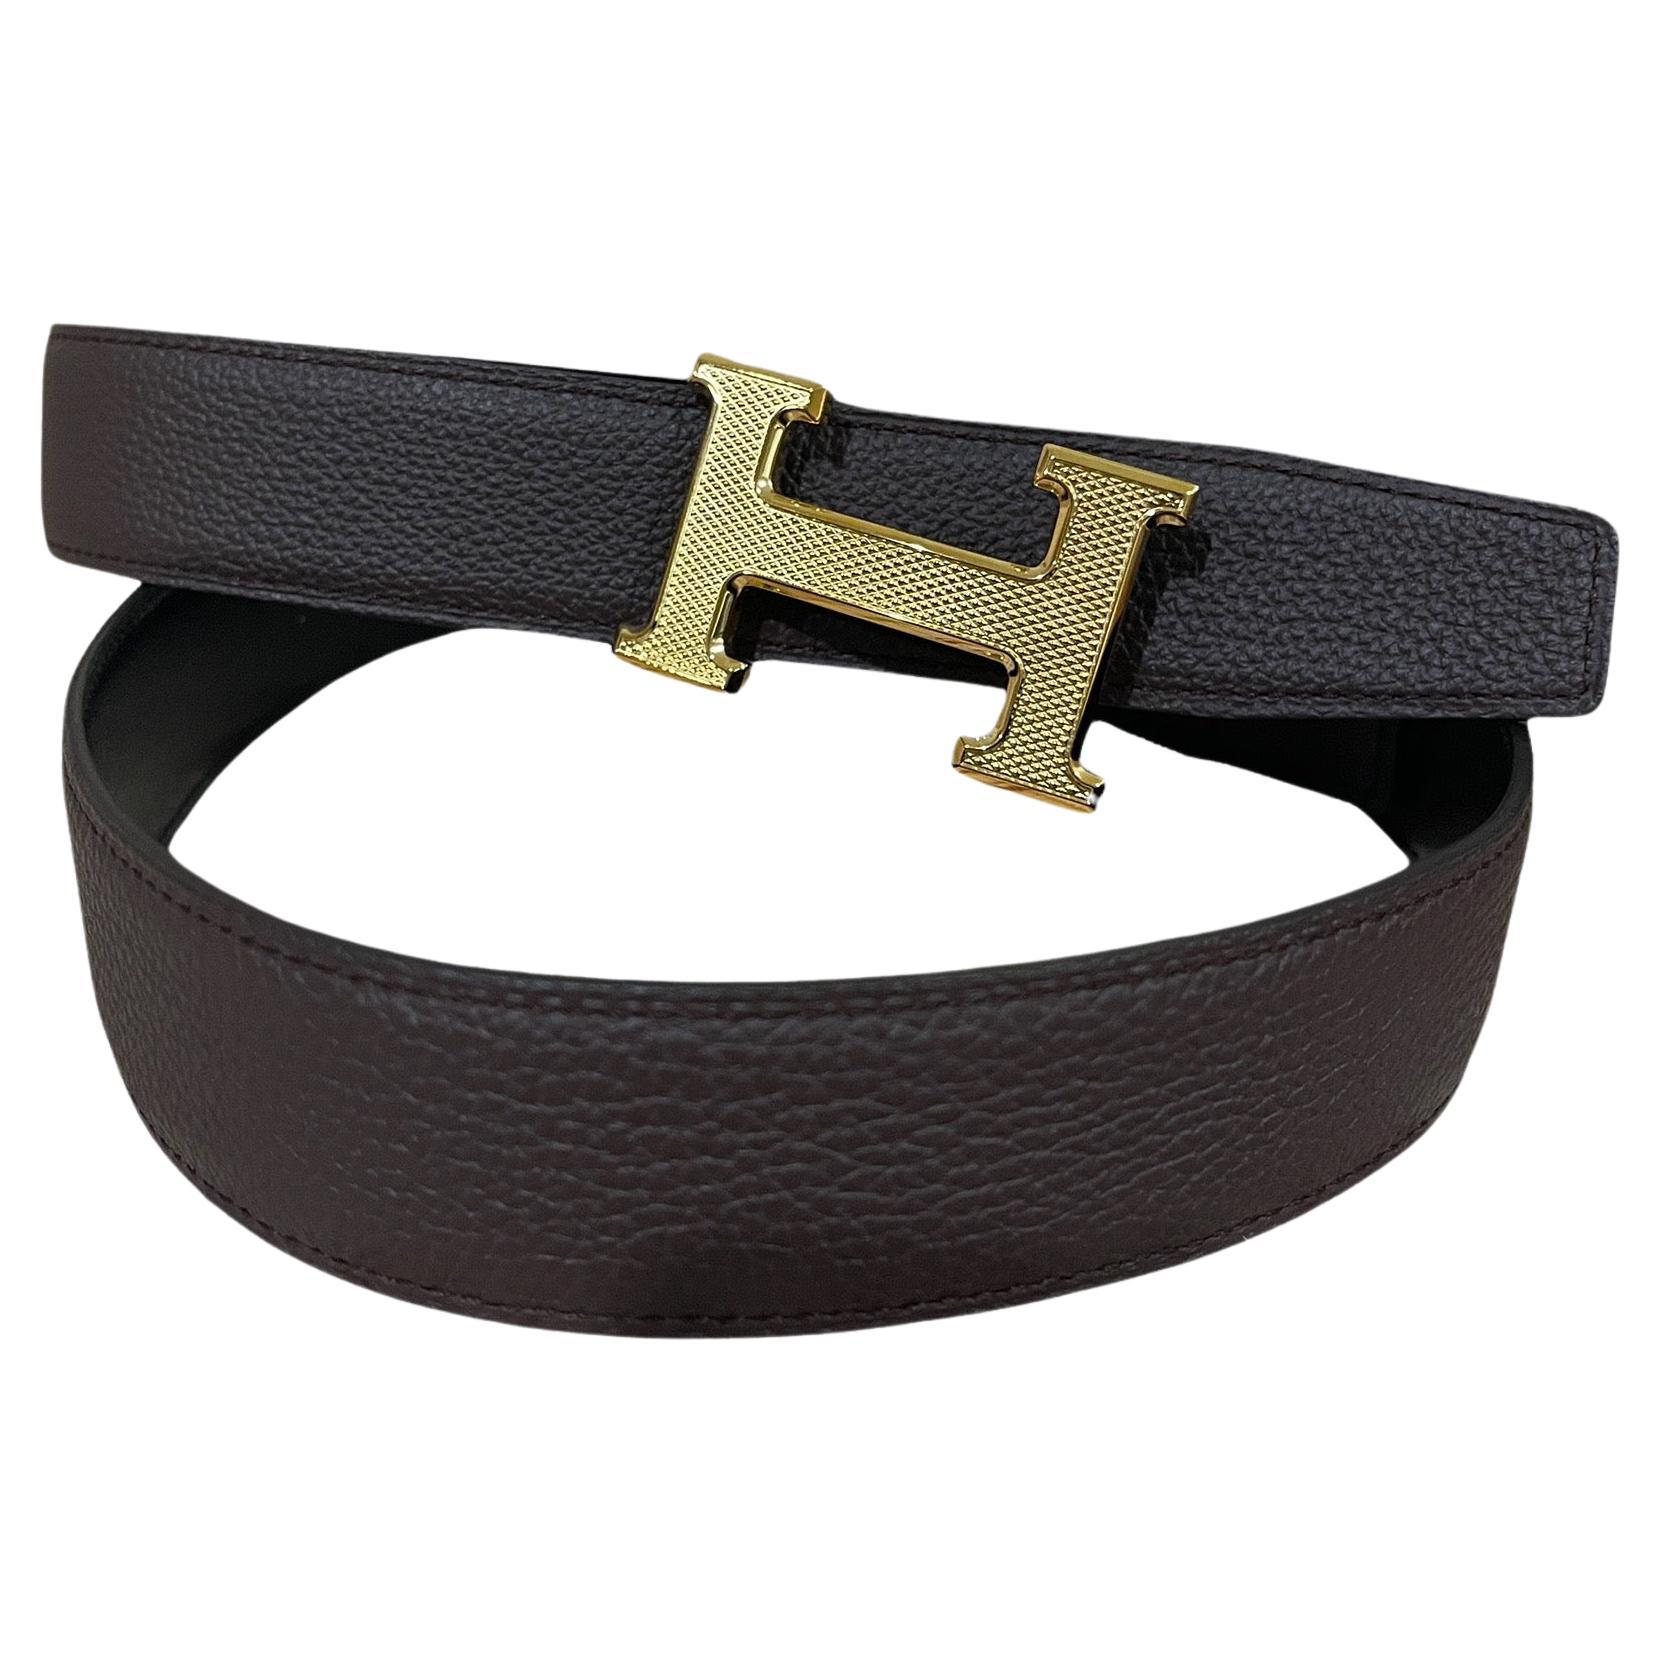 Hermes Belt Constance 32 Black Chocolate Size 85 Guillochee Buckle For Sale